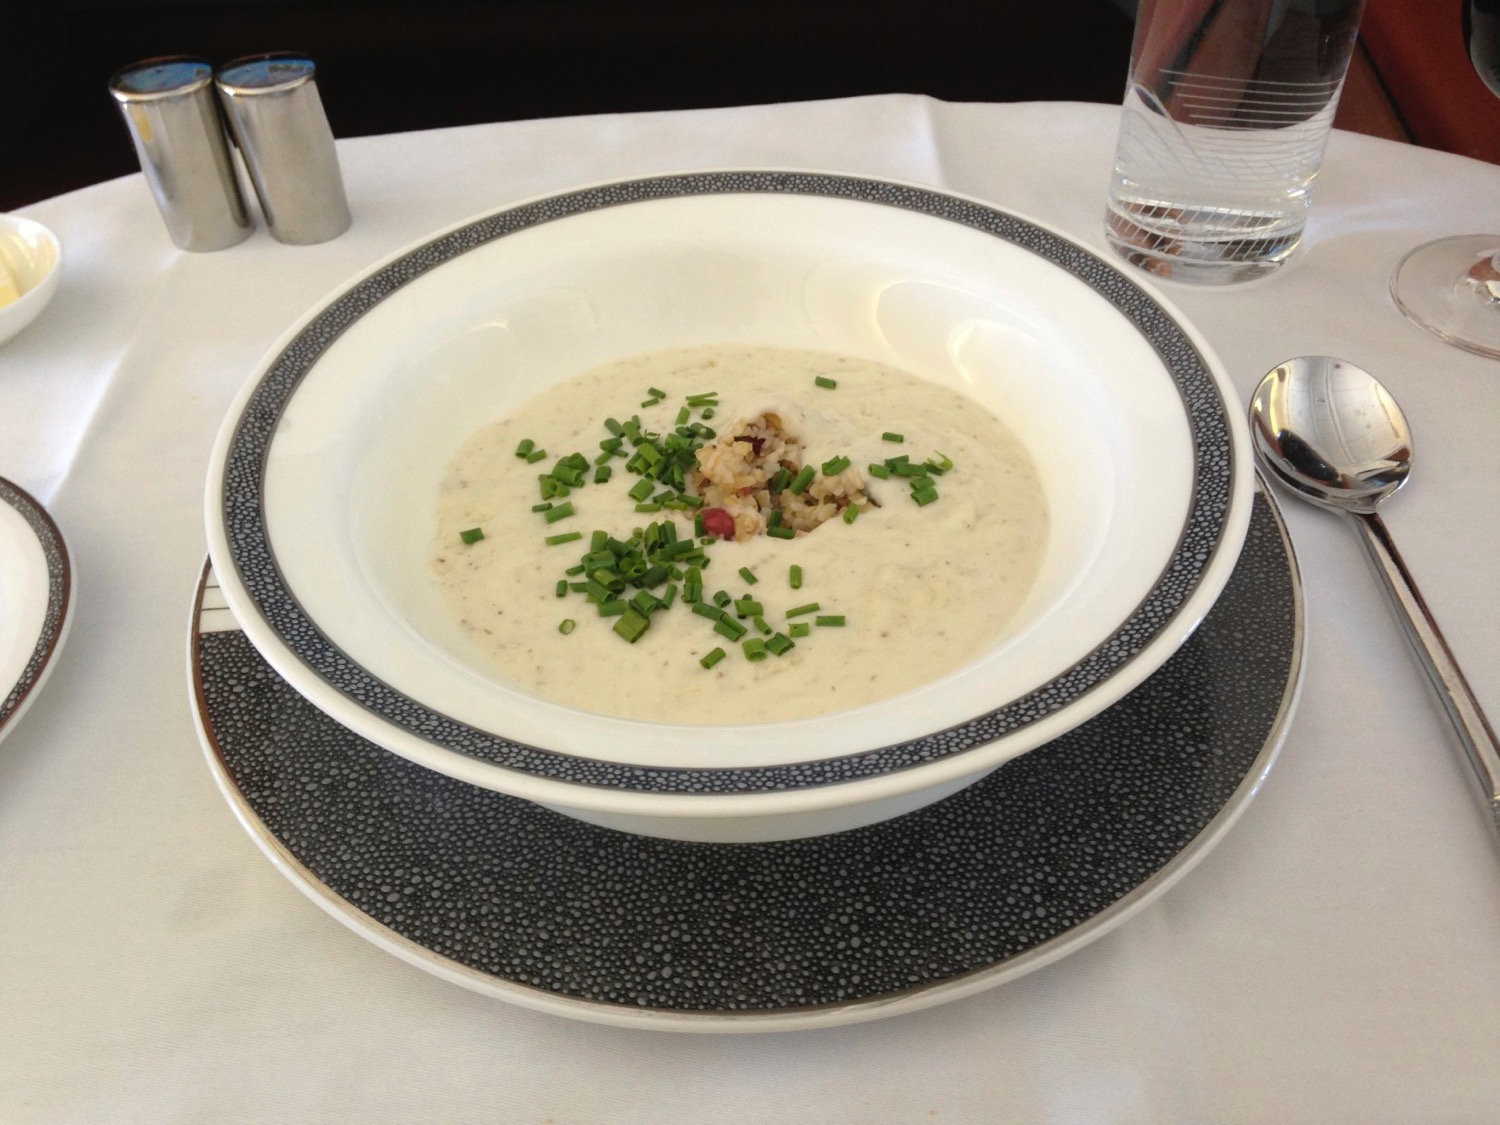 a bowl of soup with chives and a glass of water